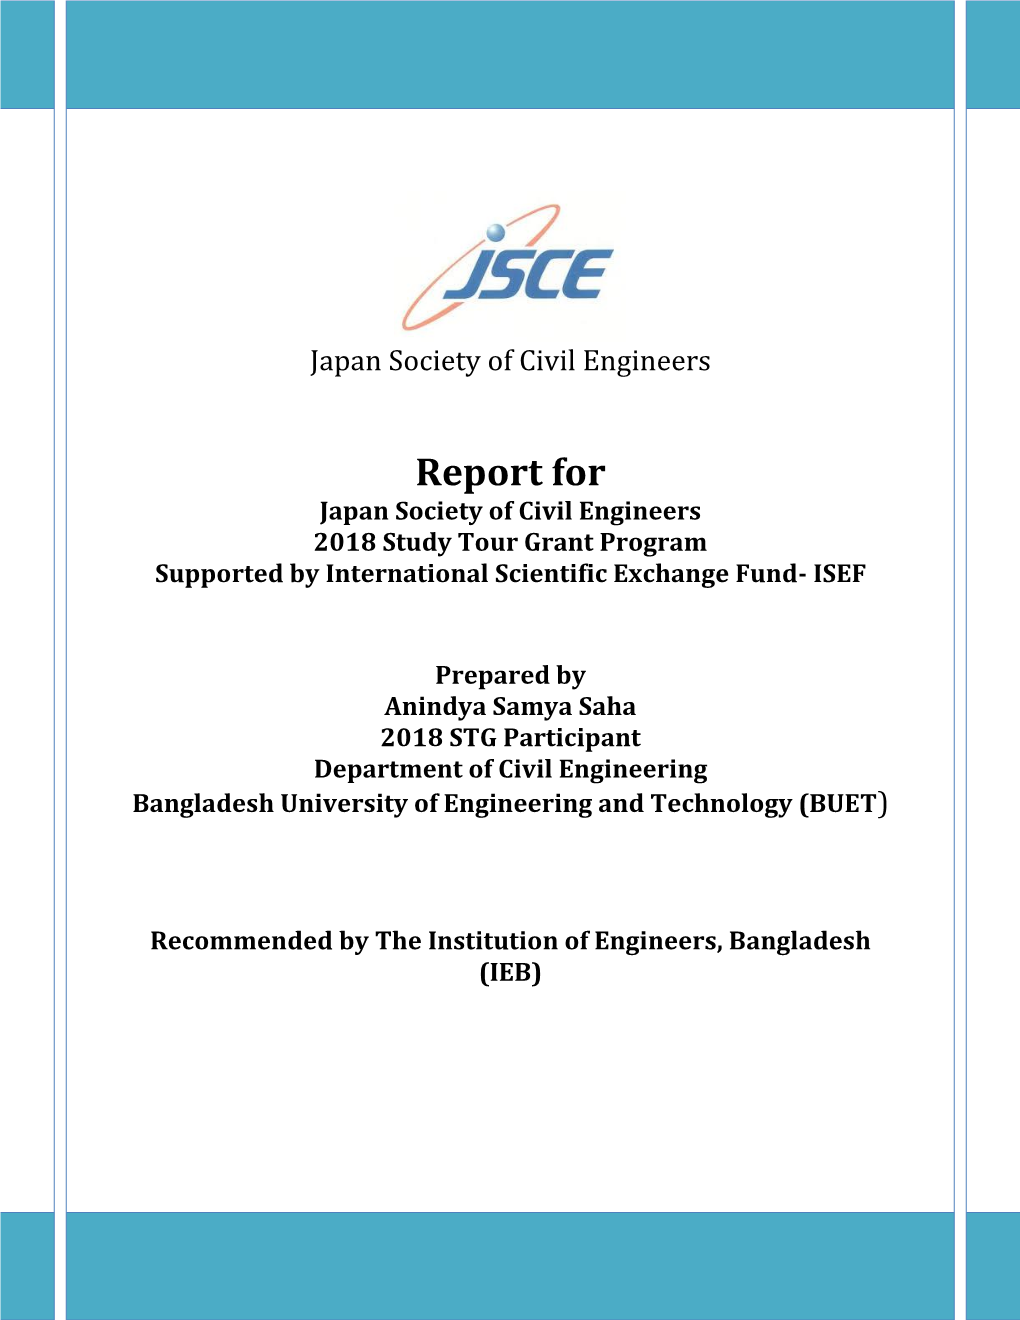 Report for Japan Society of Civil Engineers 2018 Study Tour Grant Program Supported by International Scientific Exchange Fund- ISEF